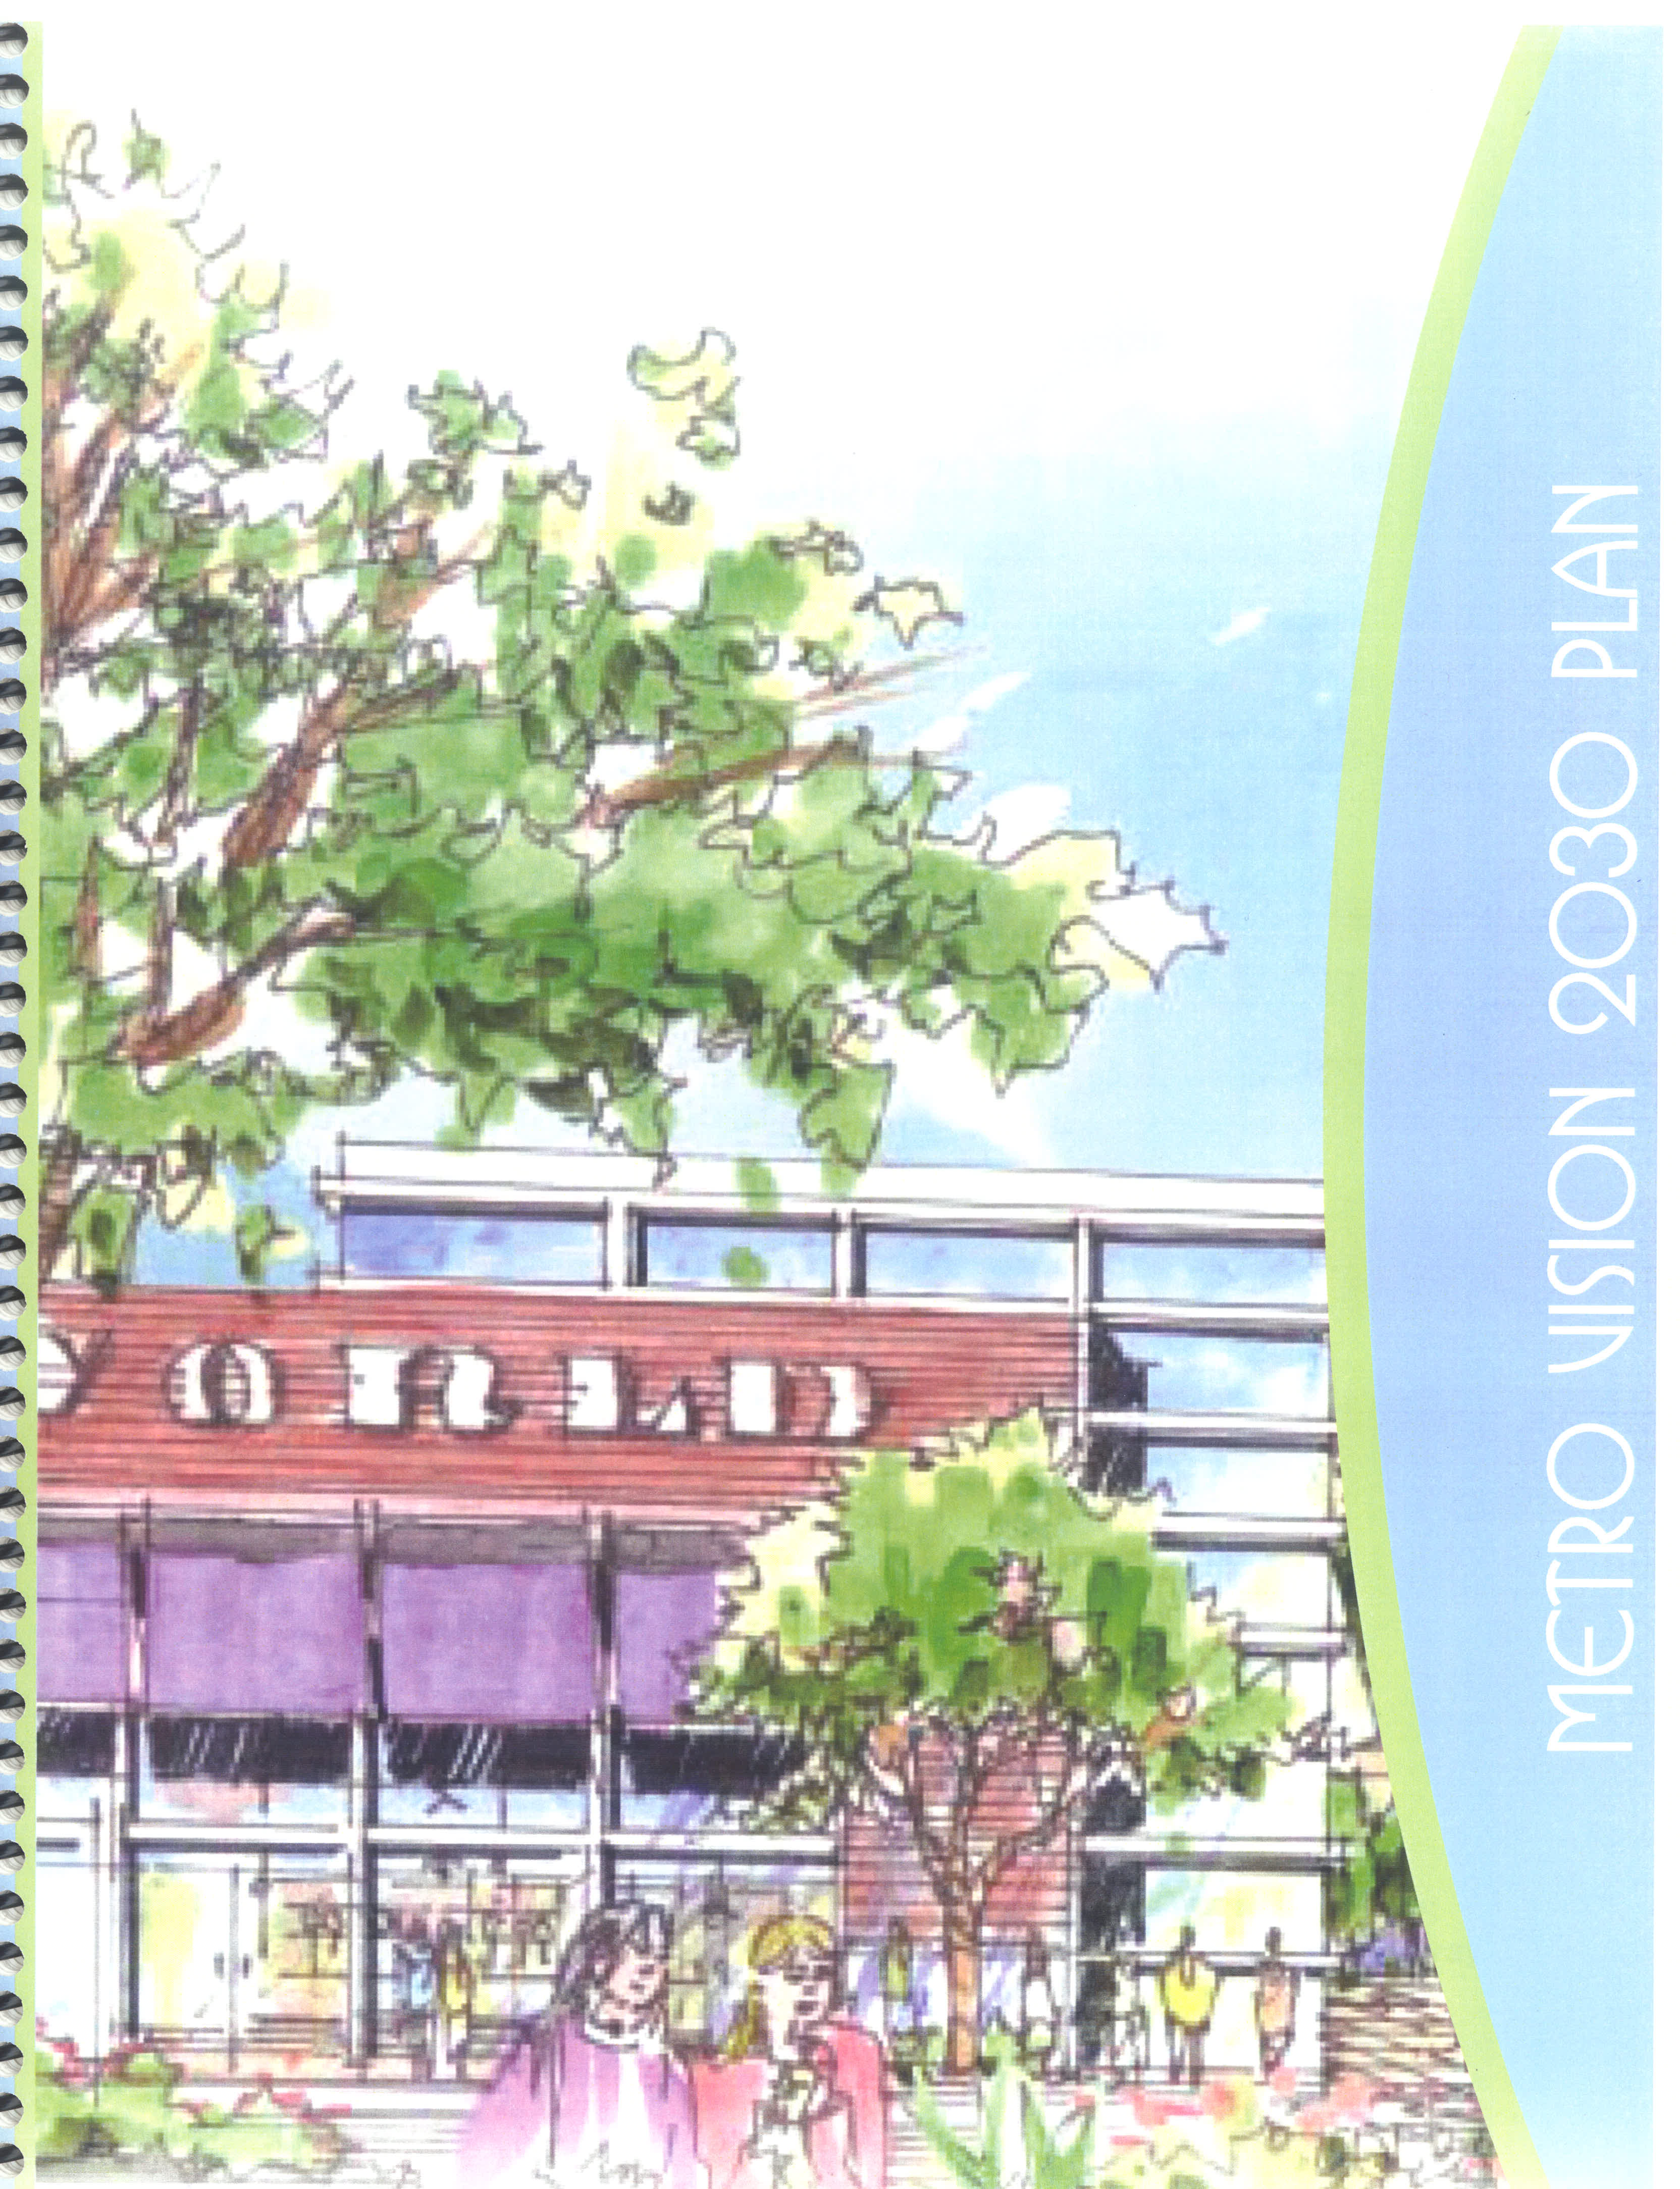 A reporc cover shows an architect's rendering of a community space with people trees and spacious buildings. The cover reads Metro Vision 2030 Plan.